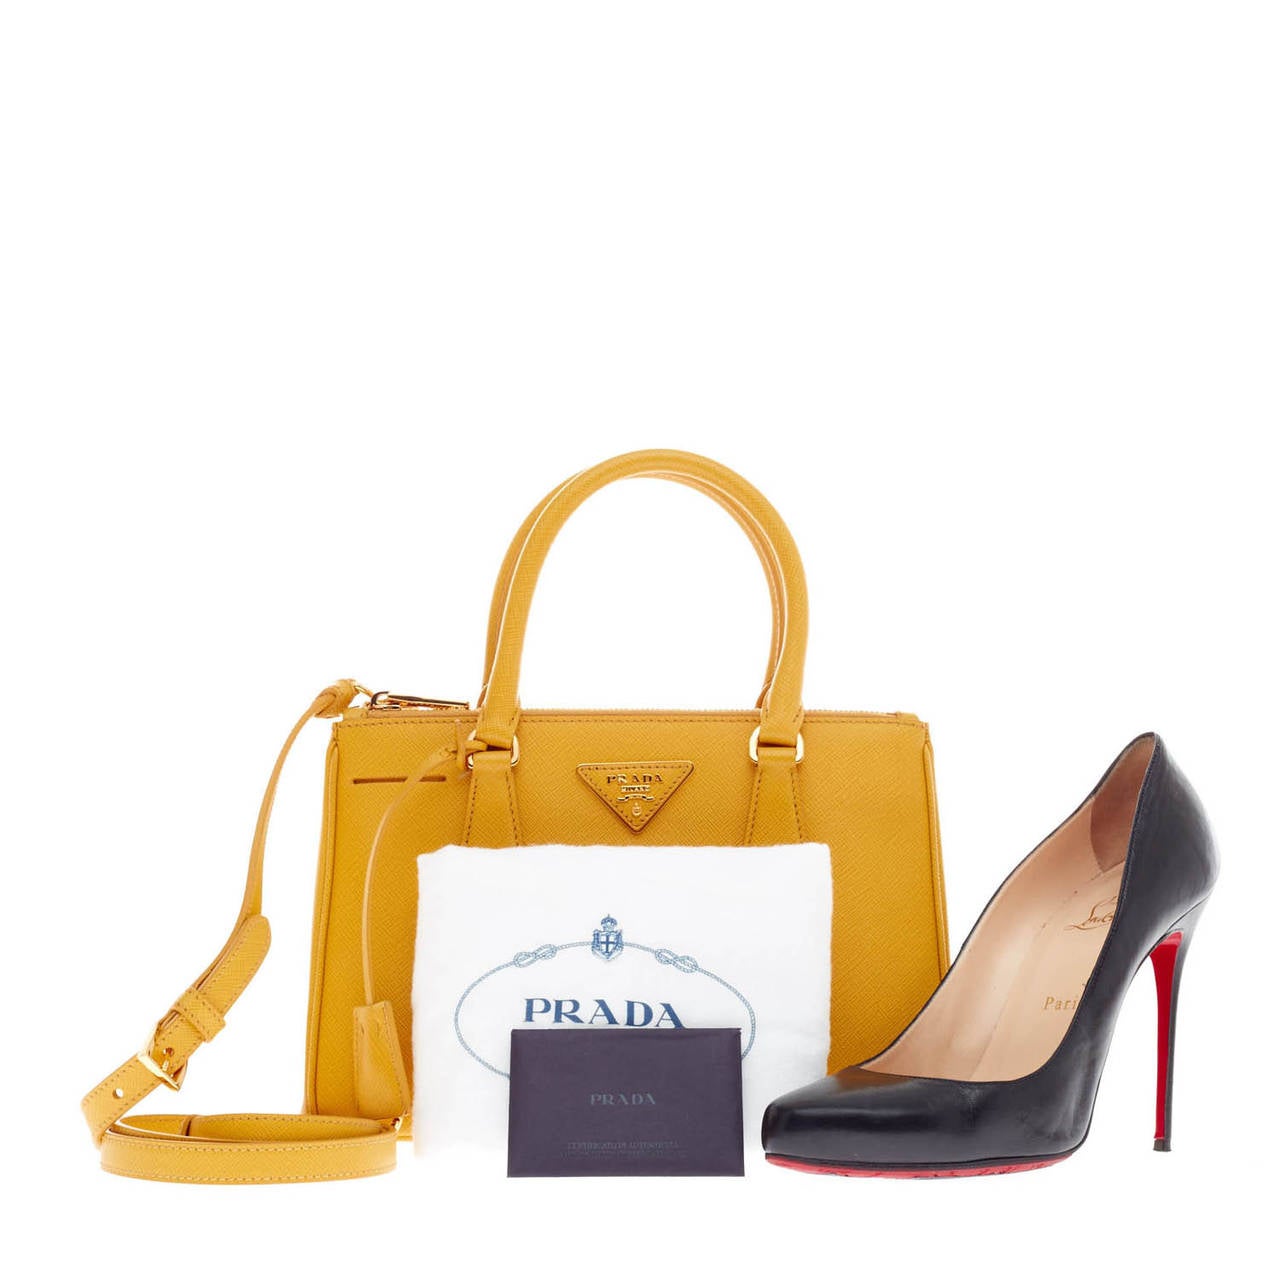 This authentic Prada Saffiano Two Zip Lux Tote Mini in Mimosa is the perfect petite bag to complete any spring outfit. It is an elegant and chic statement piece that can be handheld or worn on the shoulder with its detachable adjustable shoulder